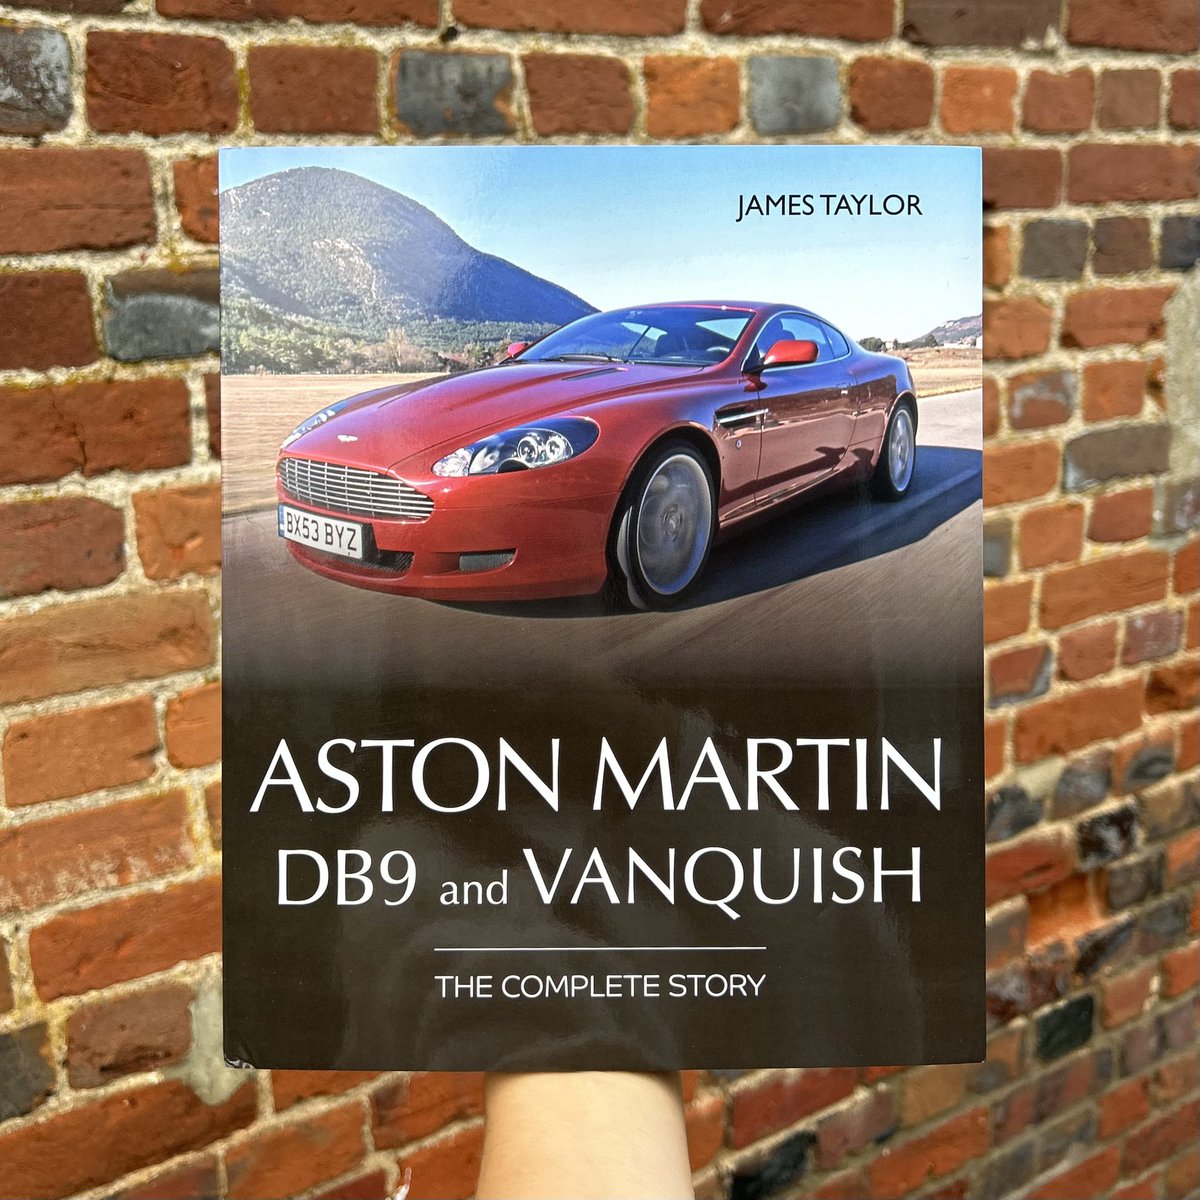 Introducing James Taylor’s newest book, Aston Martin DB9 and Vanquish. 🛞 This book tells the complete story of the DB9 and Vanquish, the models that established a new and successful era for the company that made them. #crowood #thecrowoodpress #astonmartin #astonmartindb9